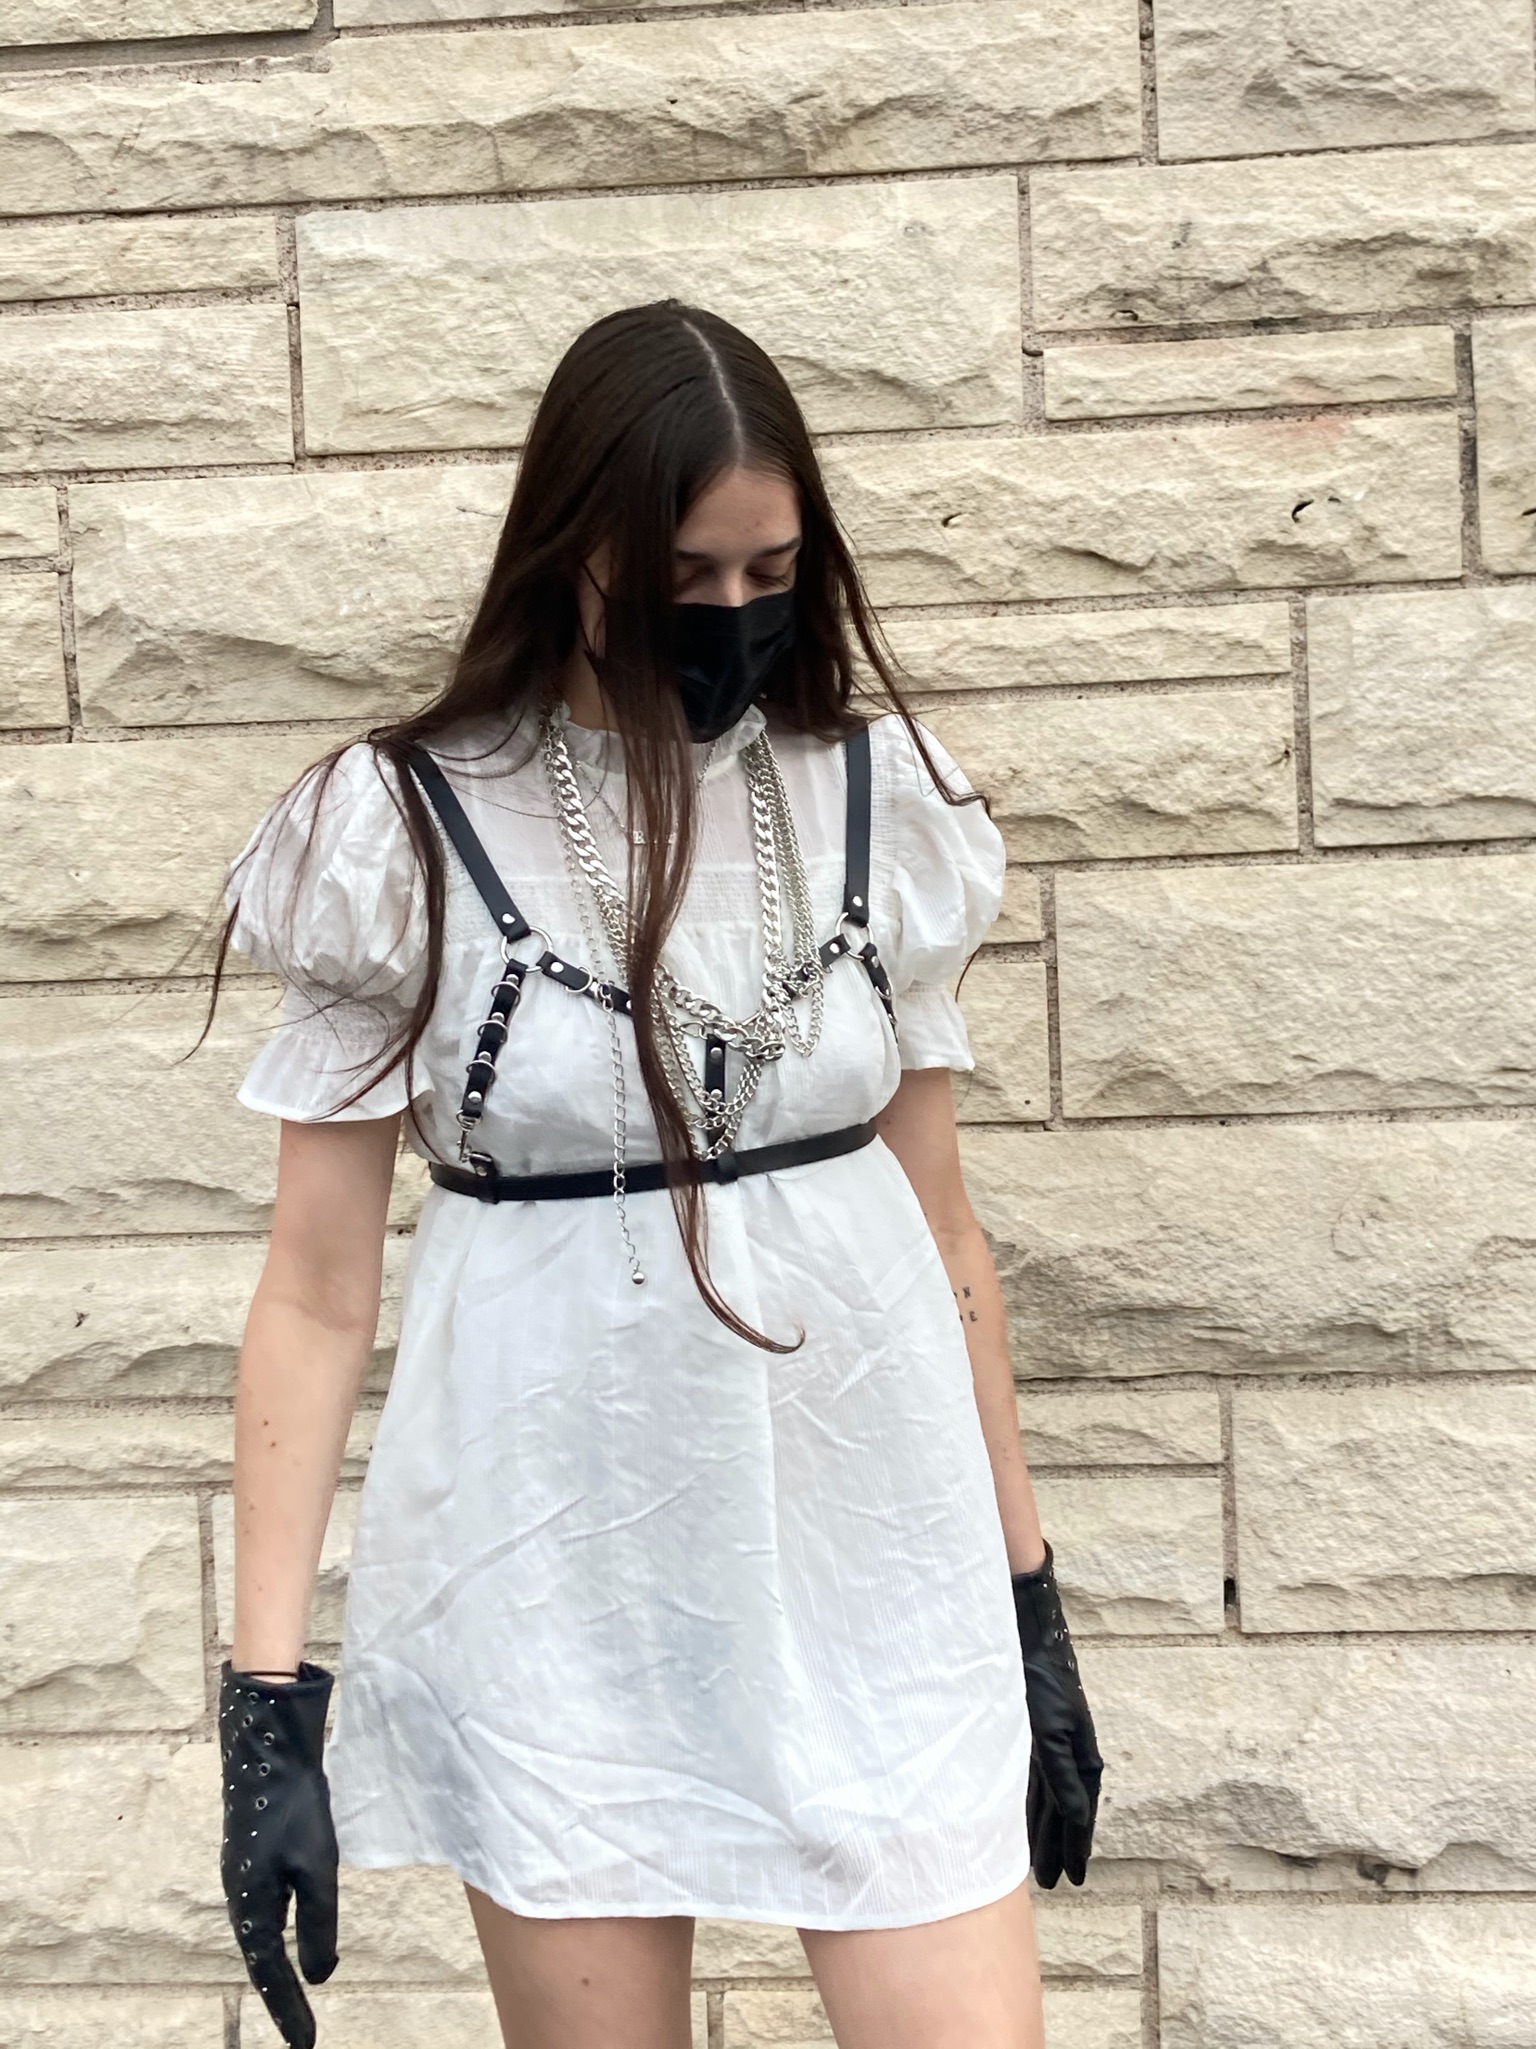 Person in front of cream brick wall wearing white dress with black harness and gloves